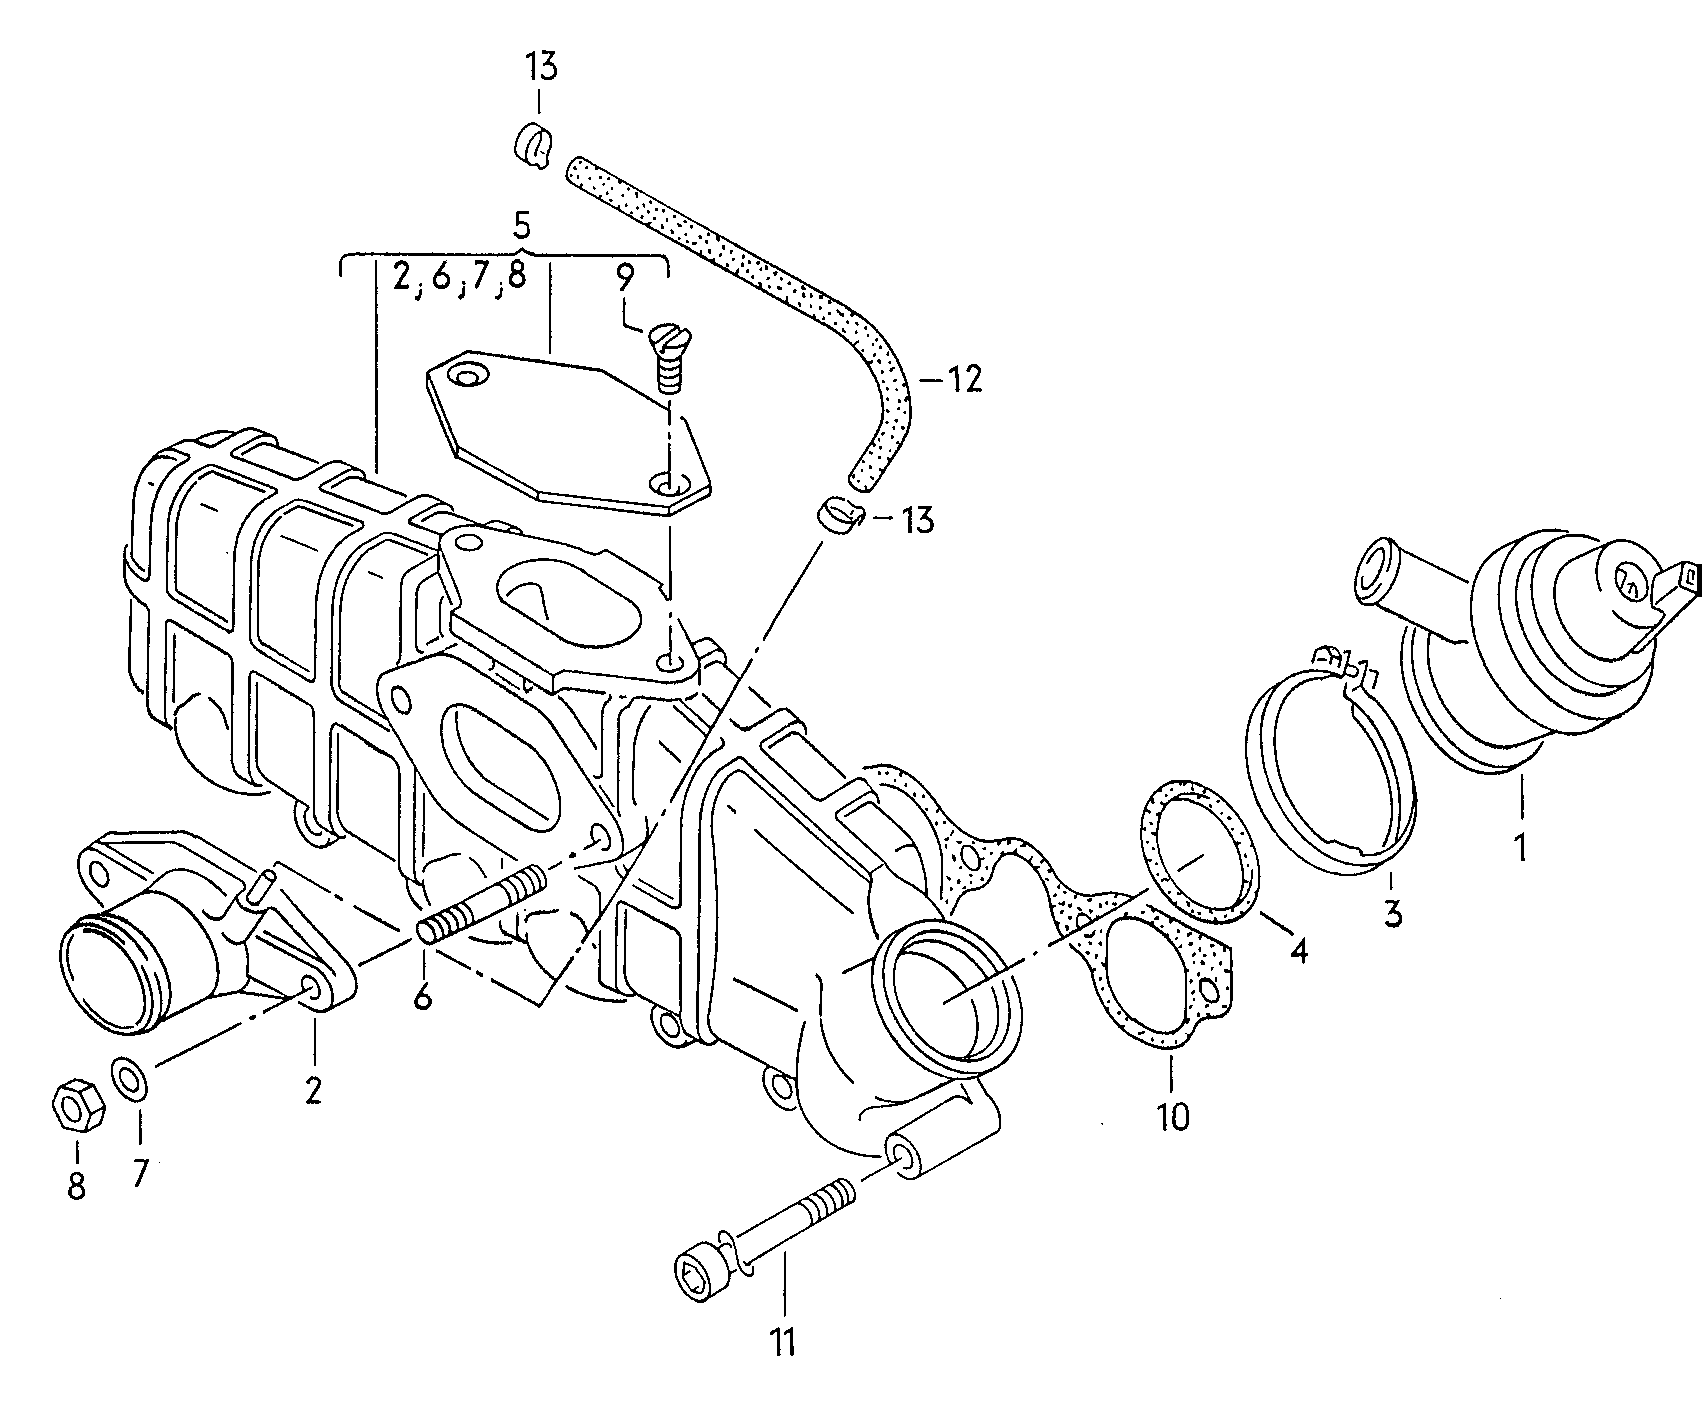 Intake connectionPressure-relief valve  - Typ 2/syncro - t2